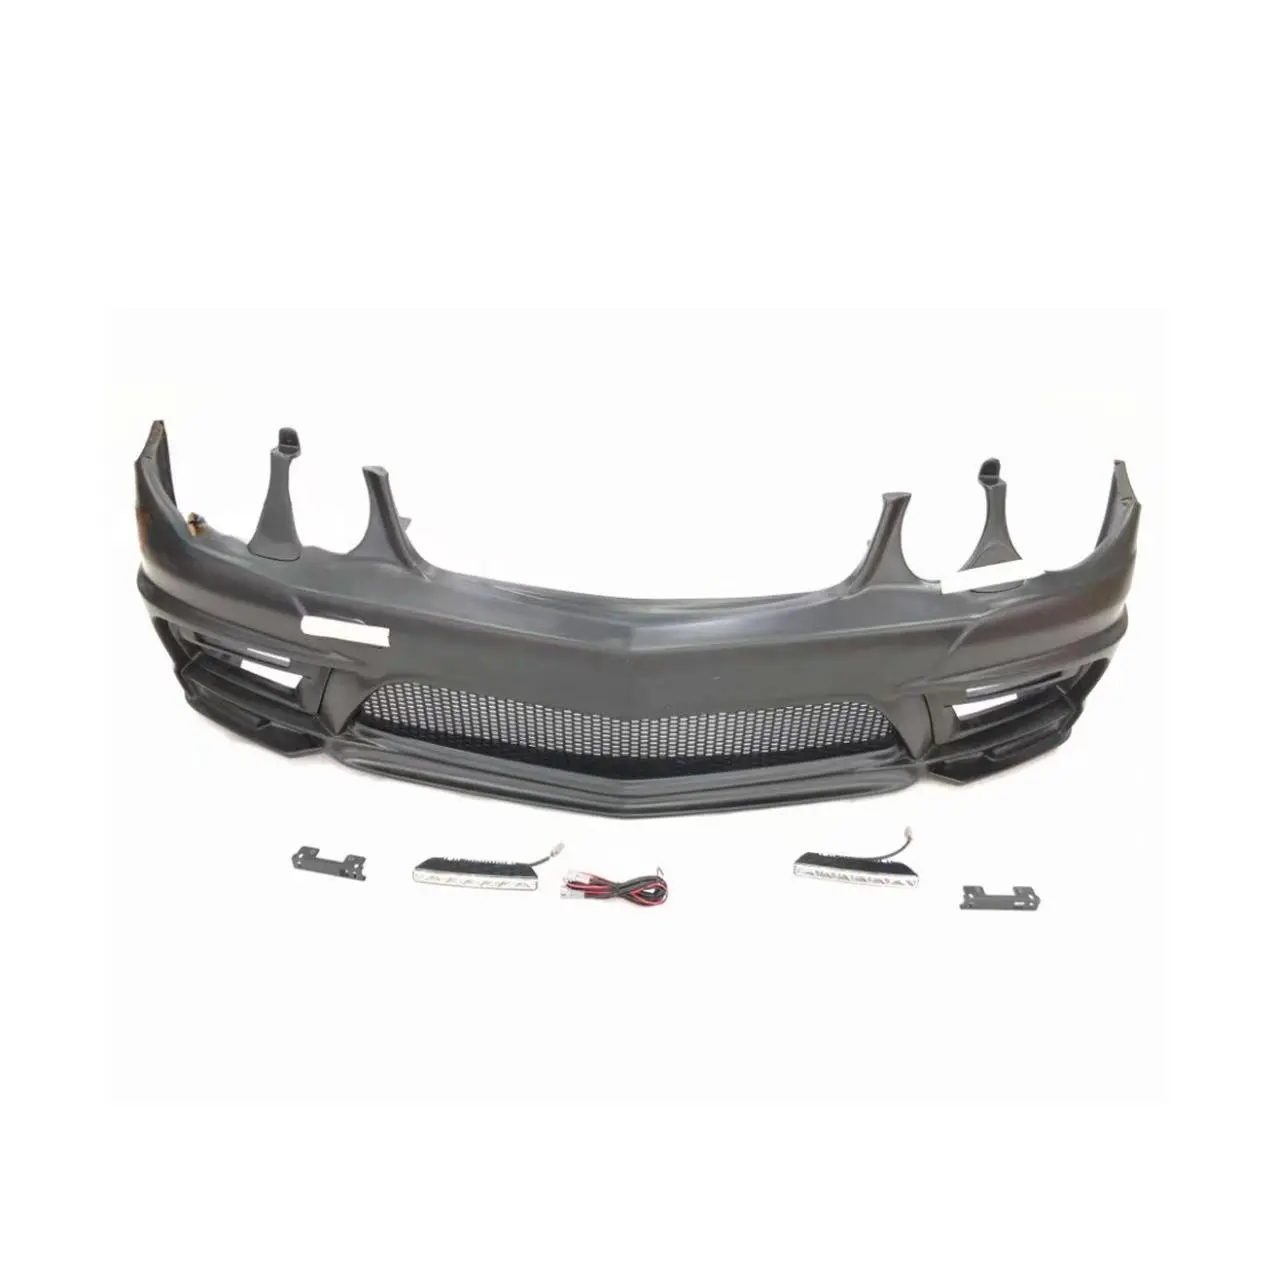 2004-2009 For Mercedes-Benz W211 E-class 230 260 280 350 modified wald large surround front bumper rear bumper side skirt